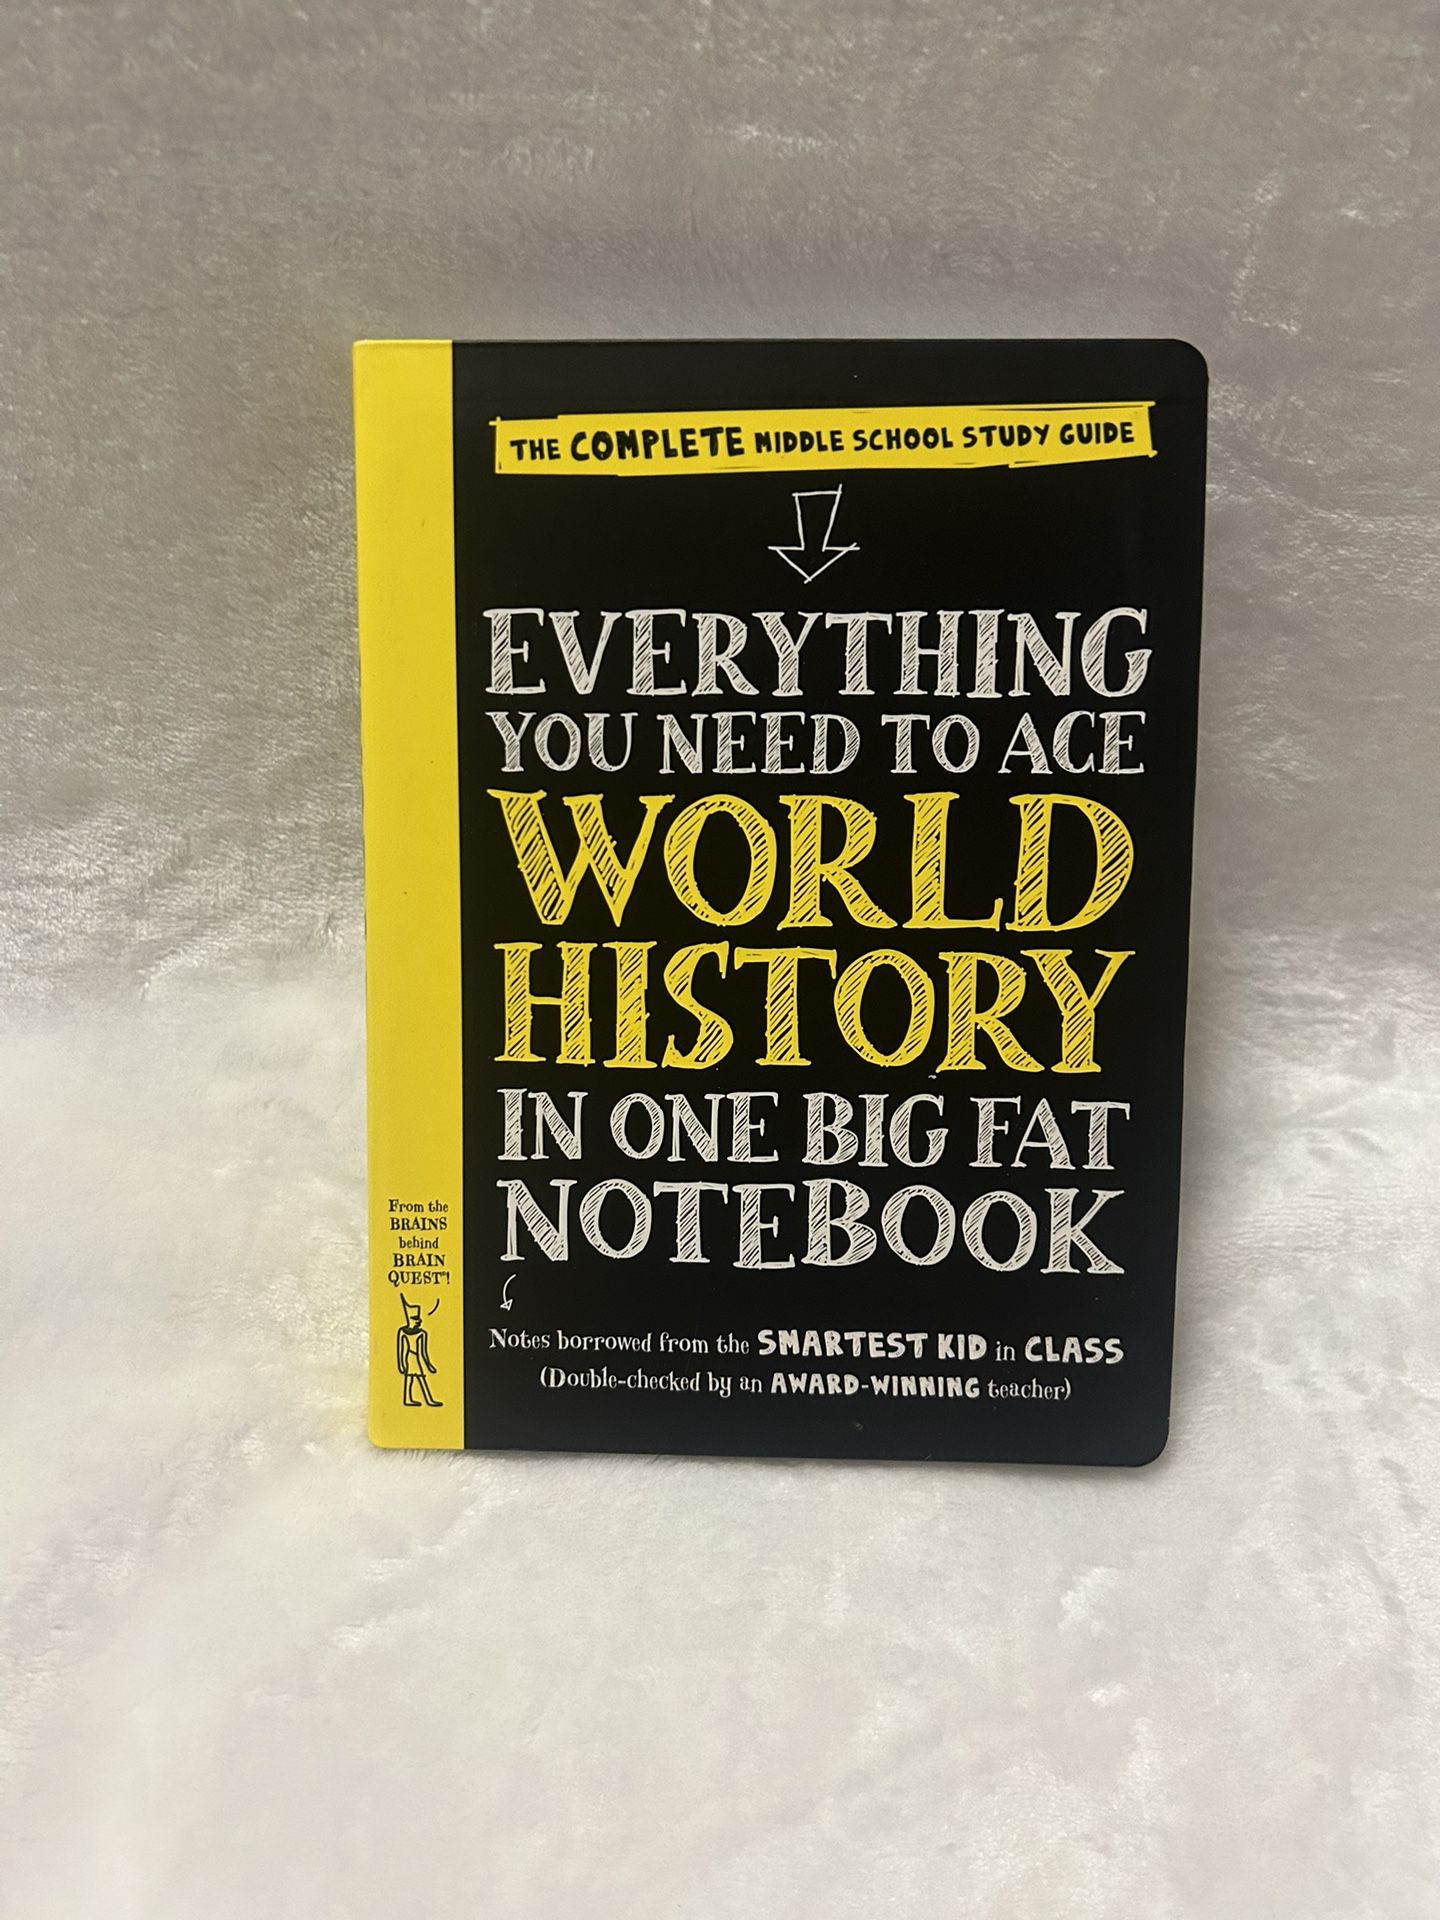 EVERYTHING YOU NEED TO ACE WORLD HISTORY IN ONE BIG FAT NOTEBOOK 